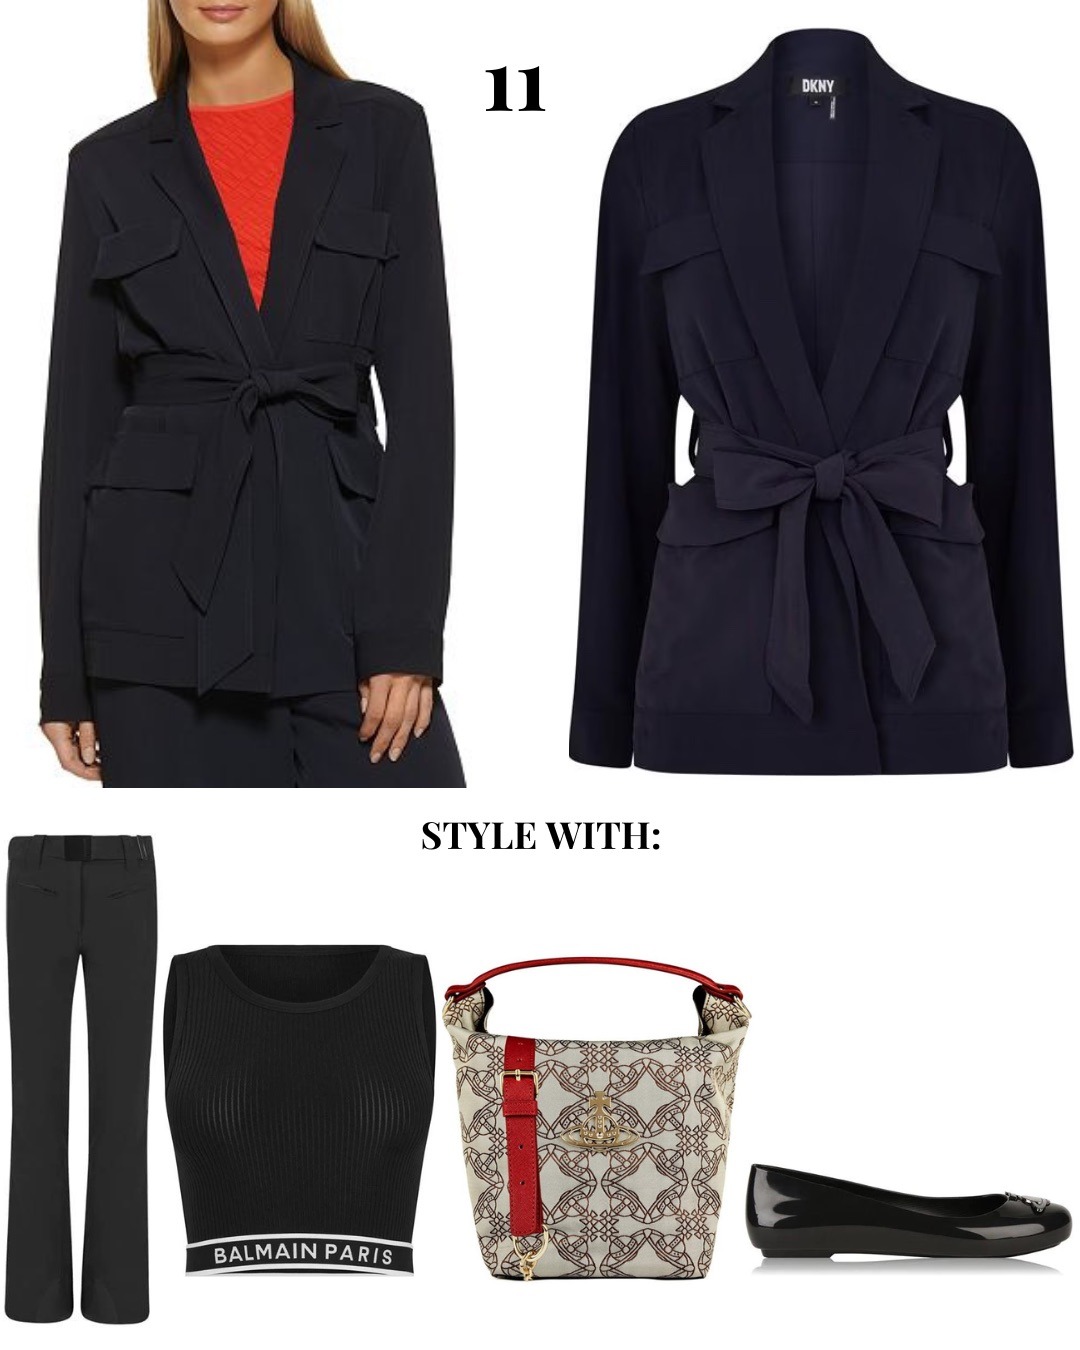 How to style navy belted blazer: black trousers, top, flats and patterned handbag.